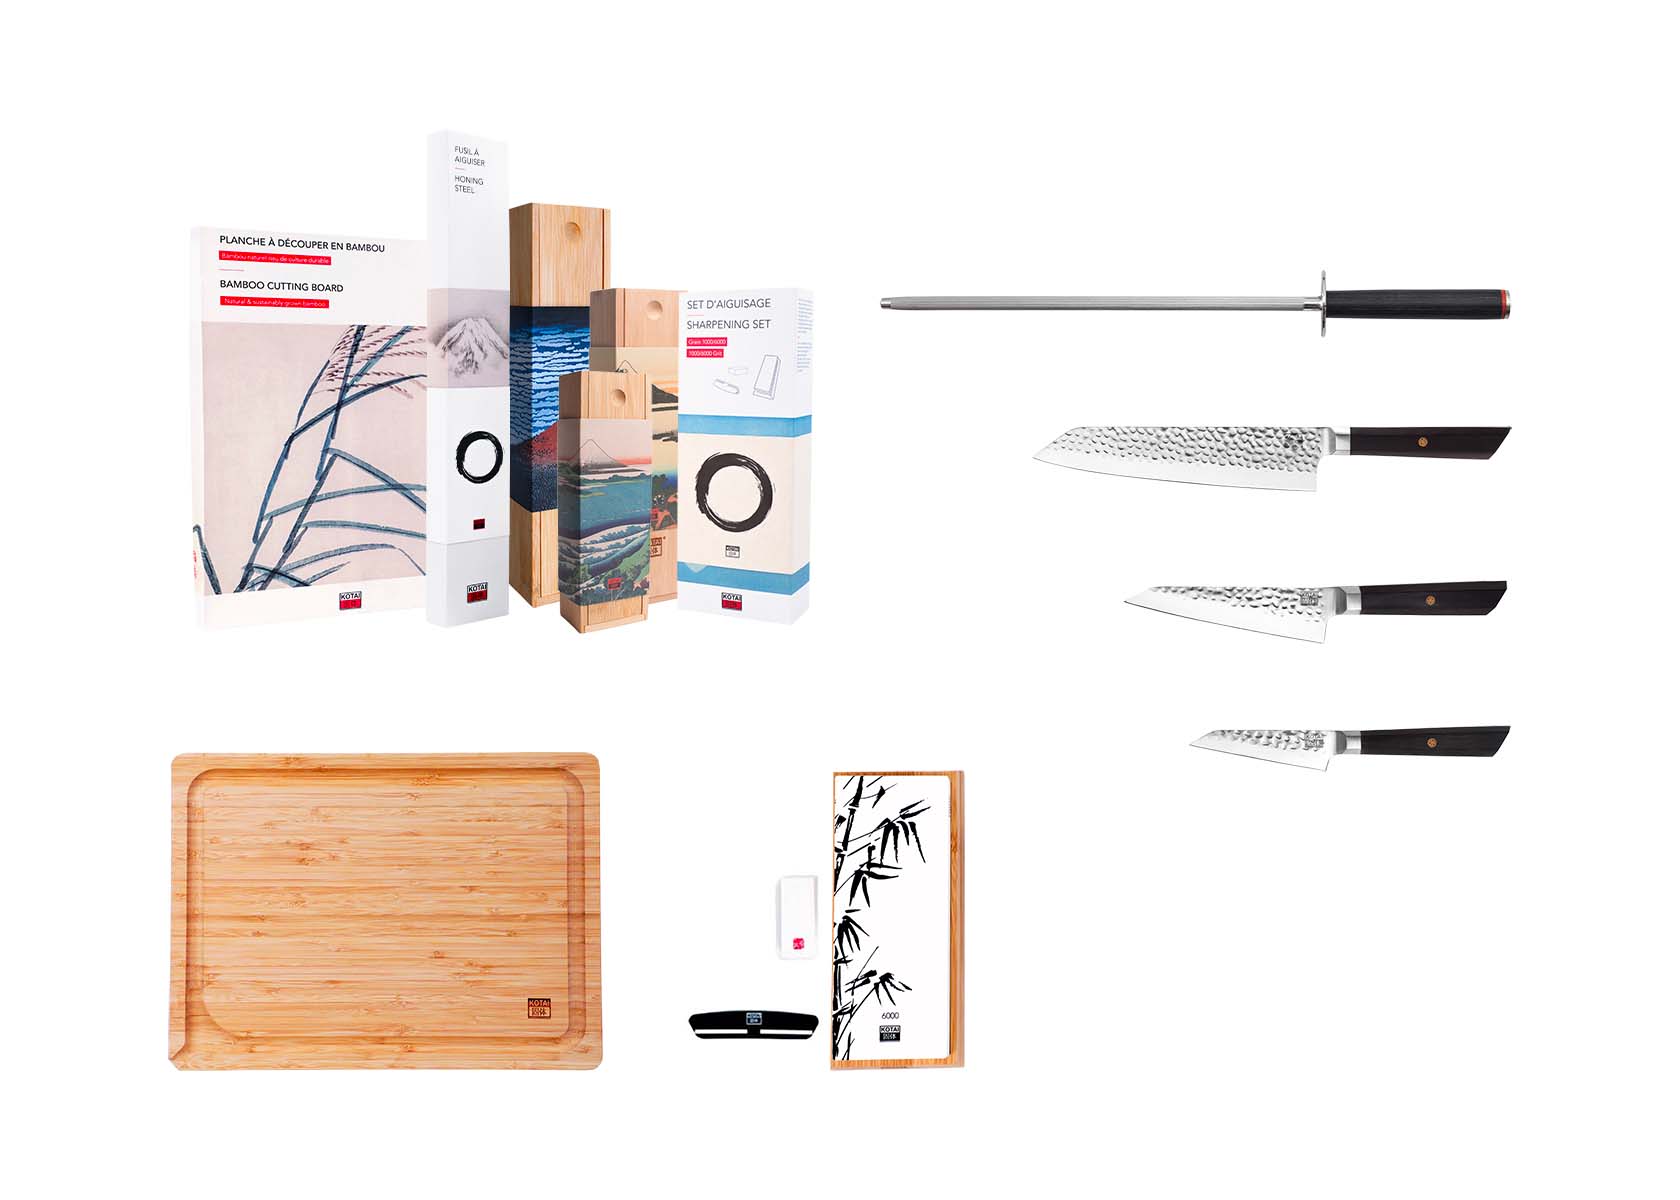 Essential Deluxe 6-Piece Knife Set - Bunka Collection